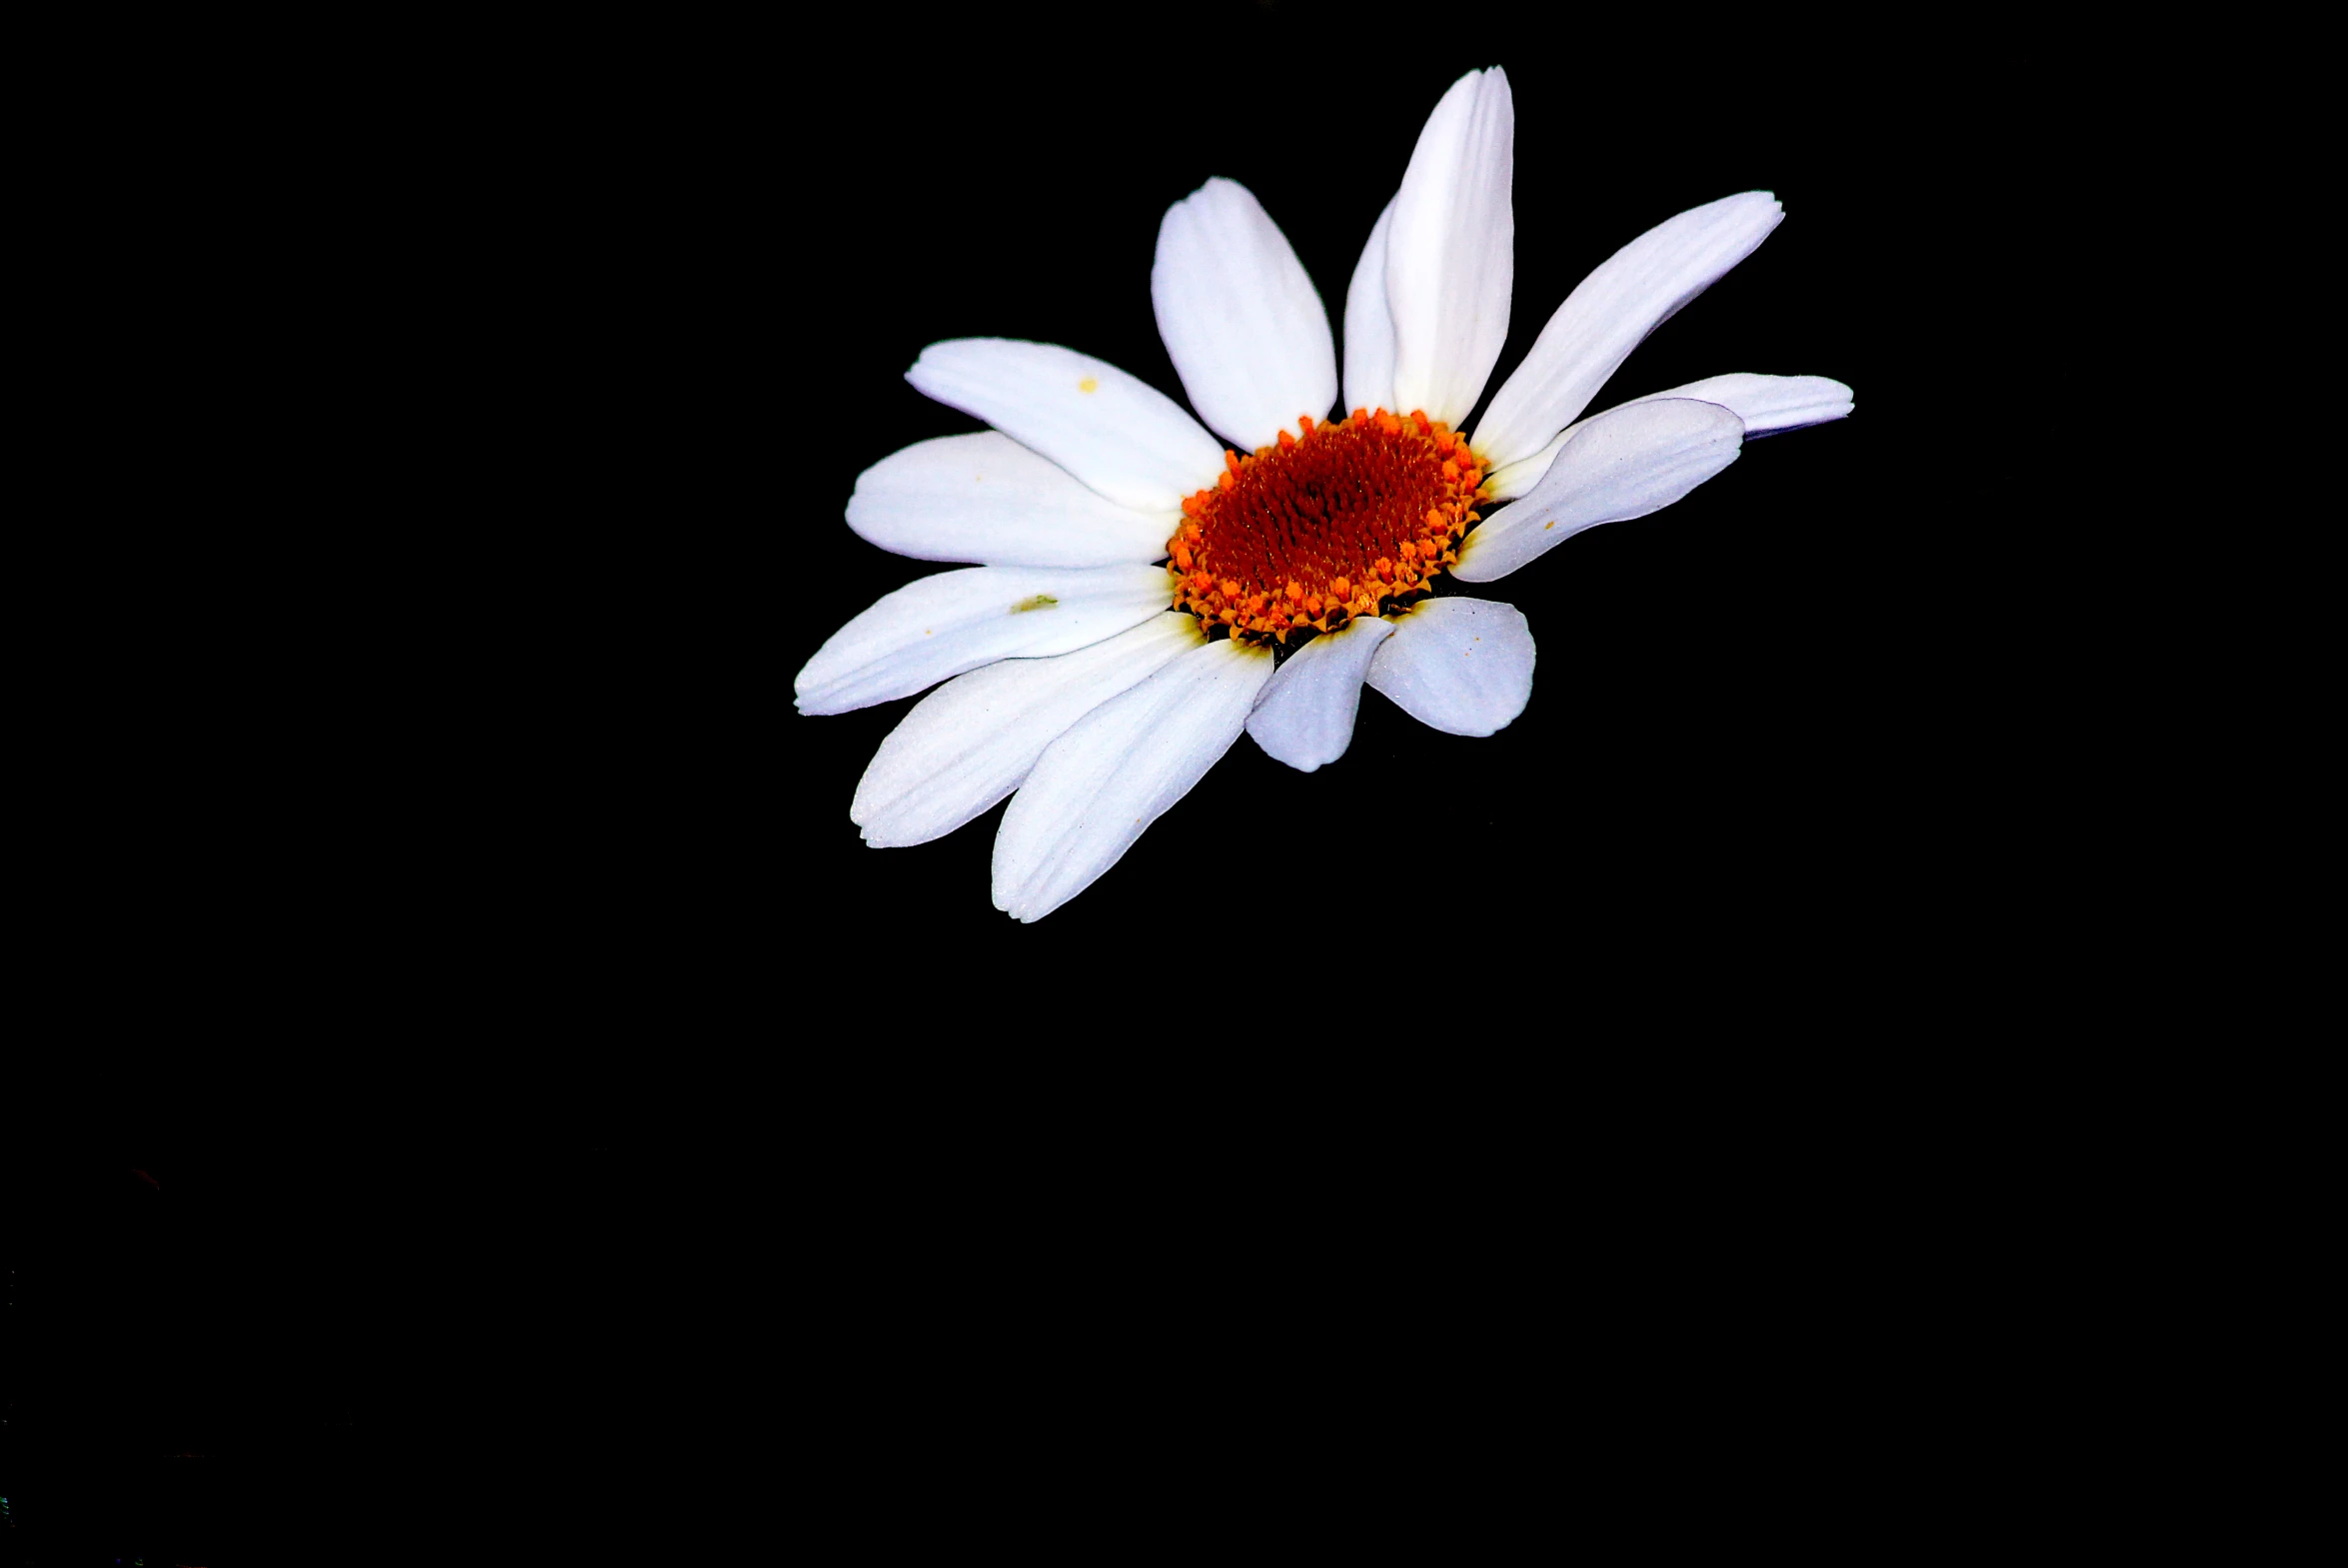 a white daisy with a orange center on a dark background